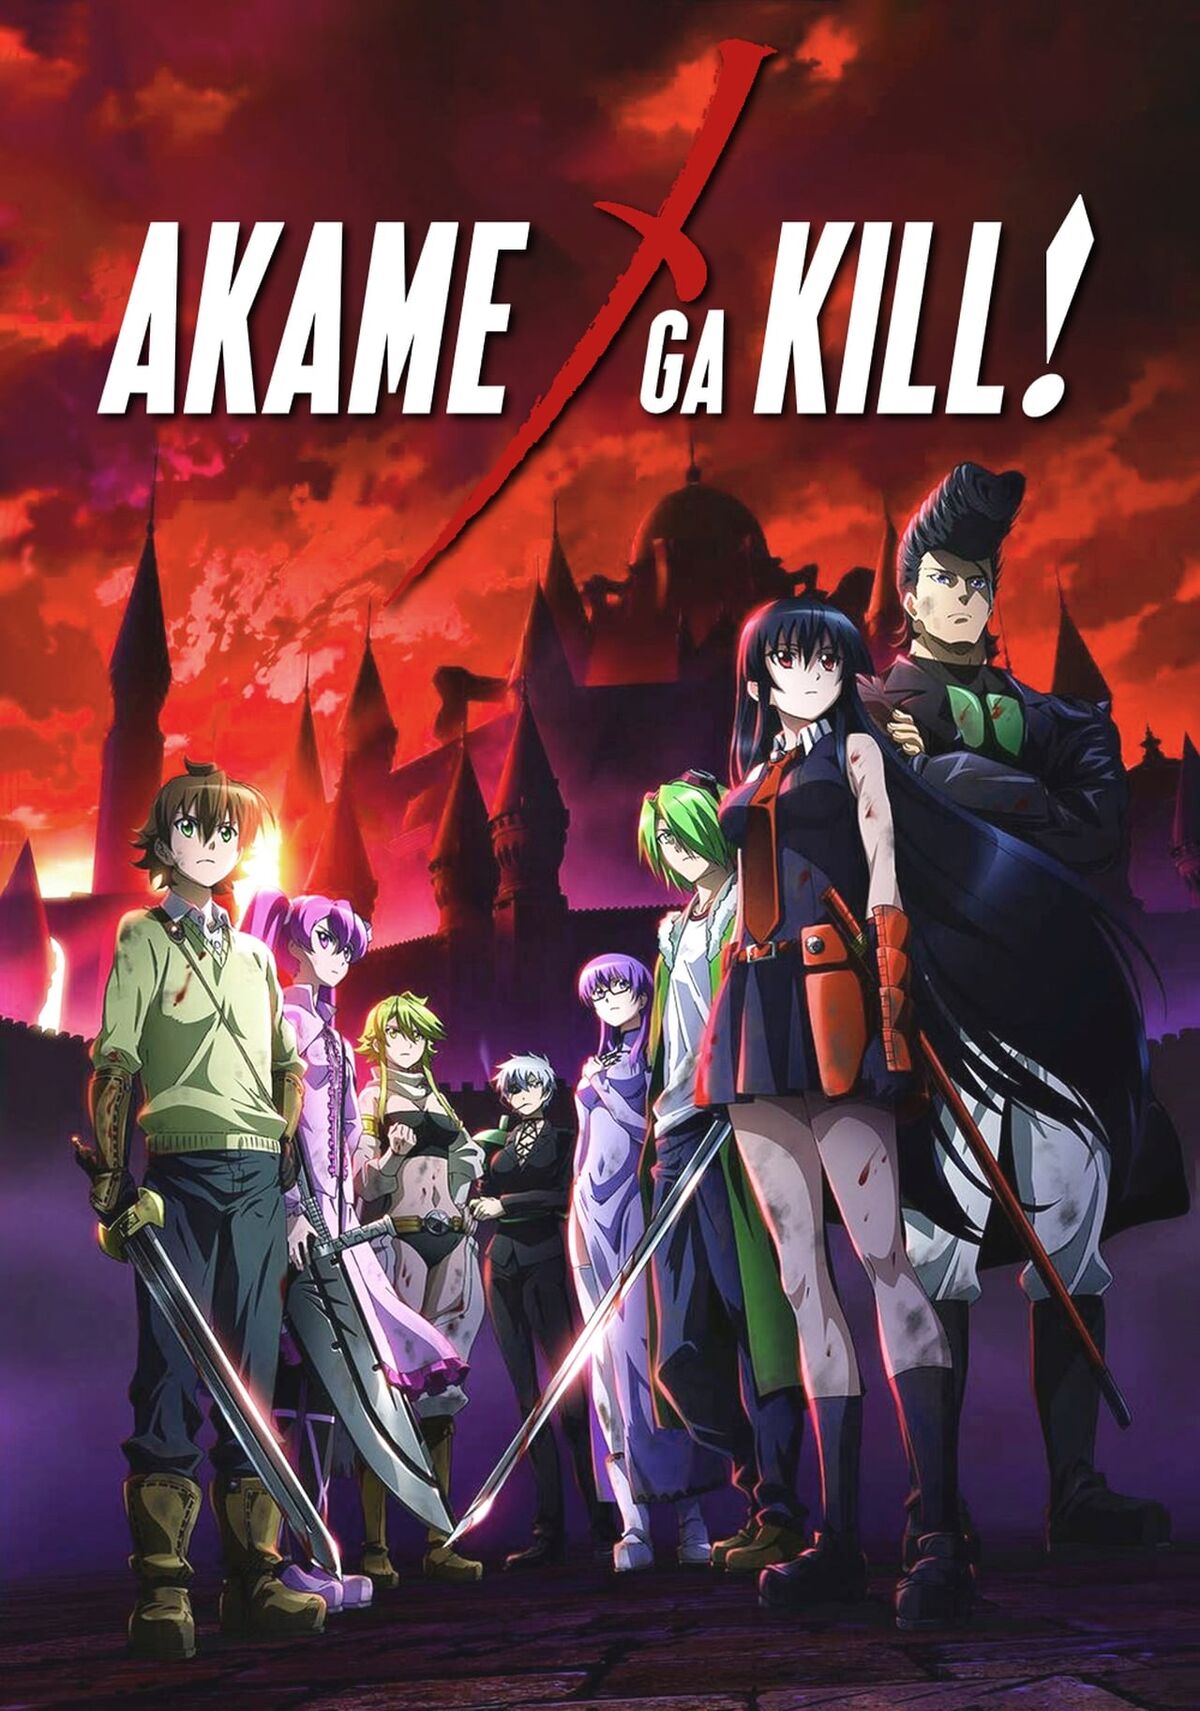 Crunchyroll on X: With the conclusion of Akame ga Kill, author Takahiro  and artist Strelka team up for new series ⭐️ More:    / X